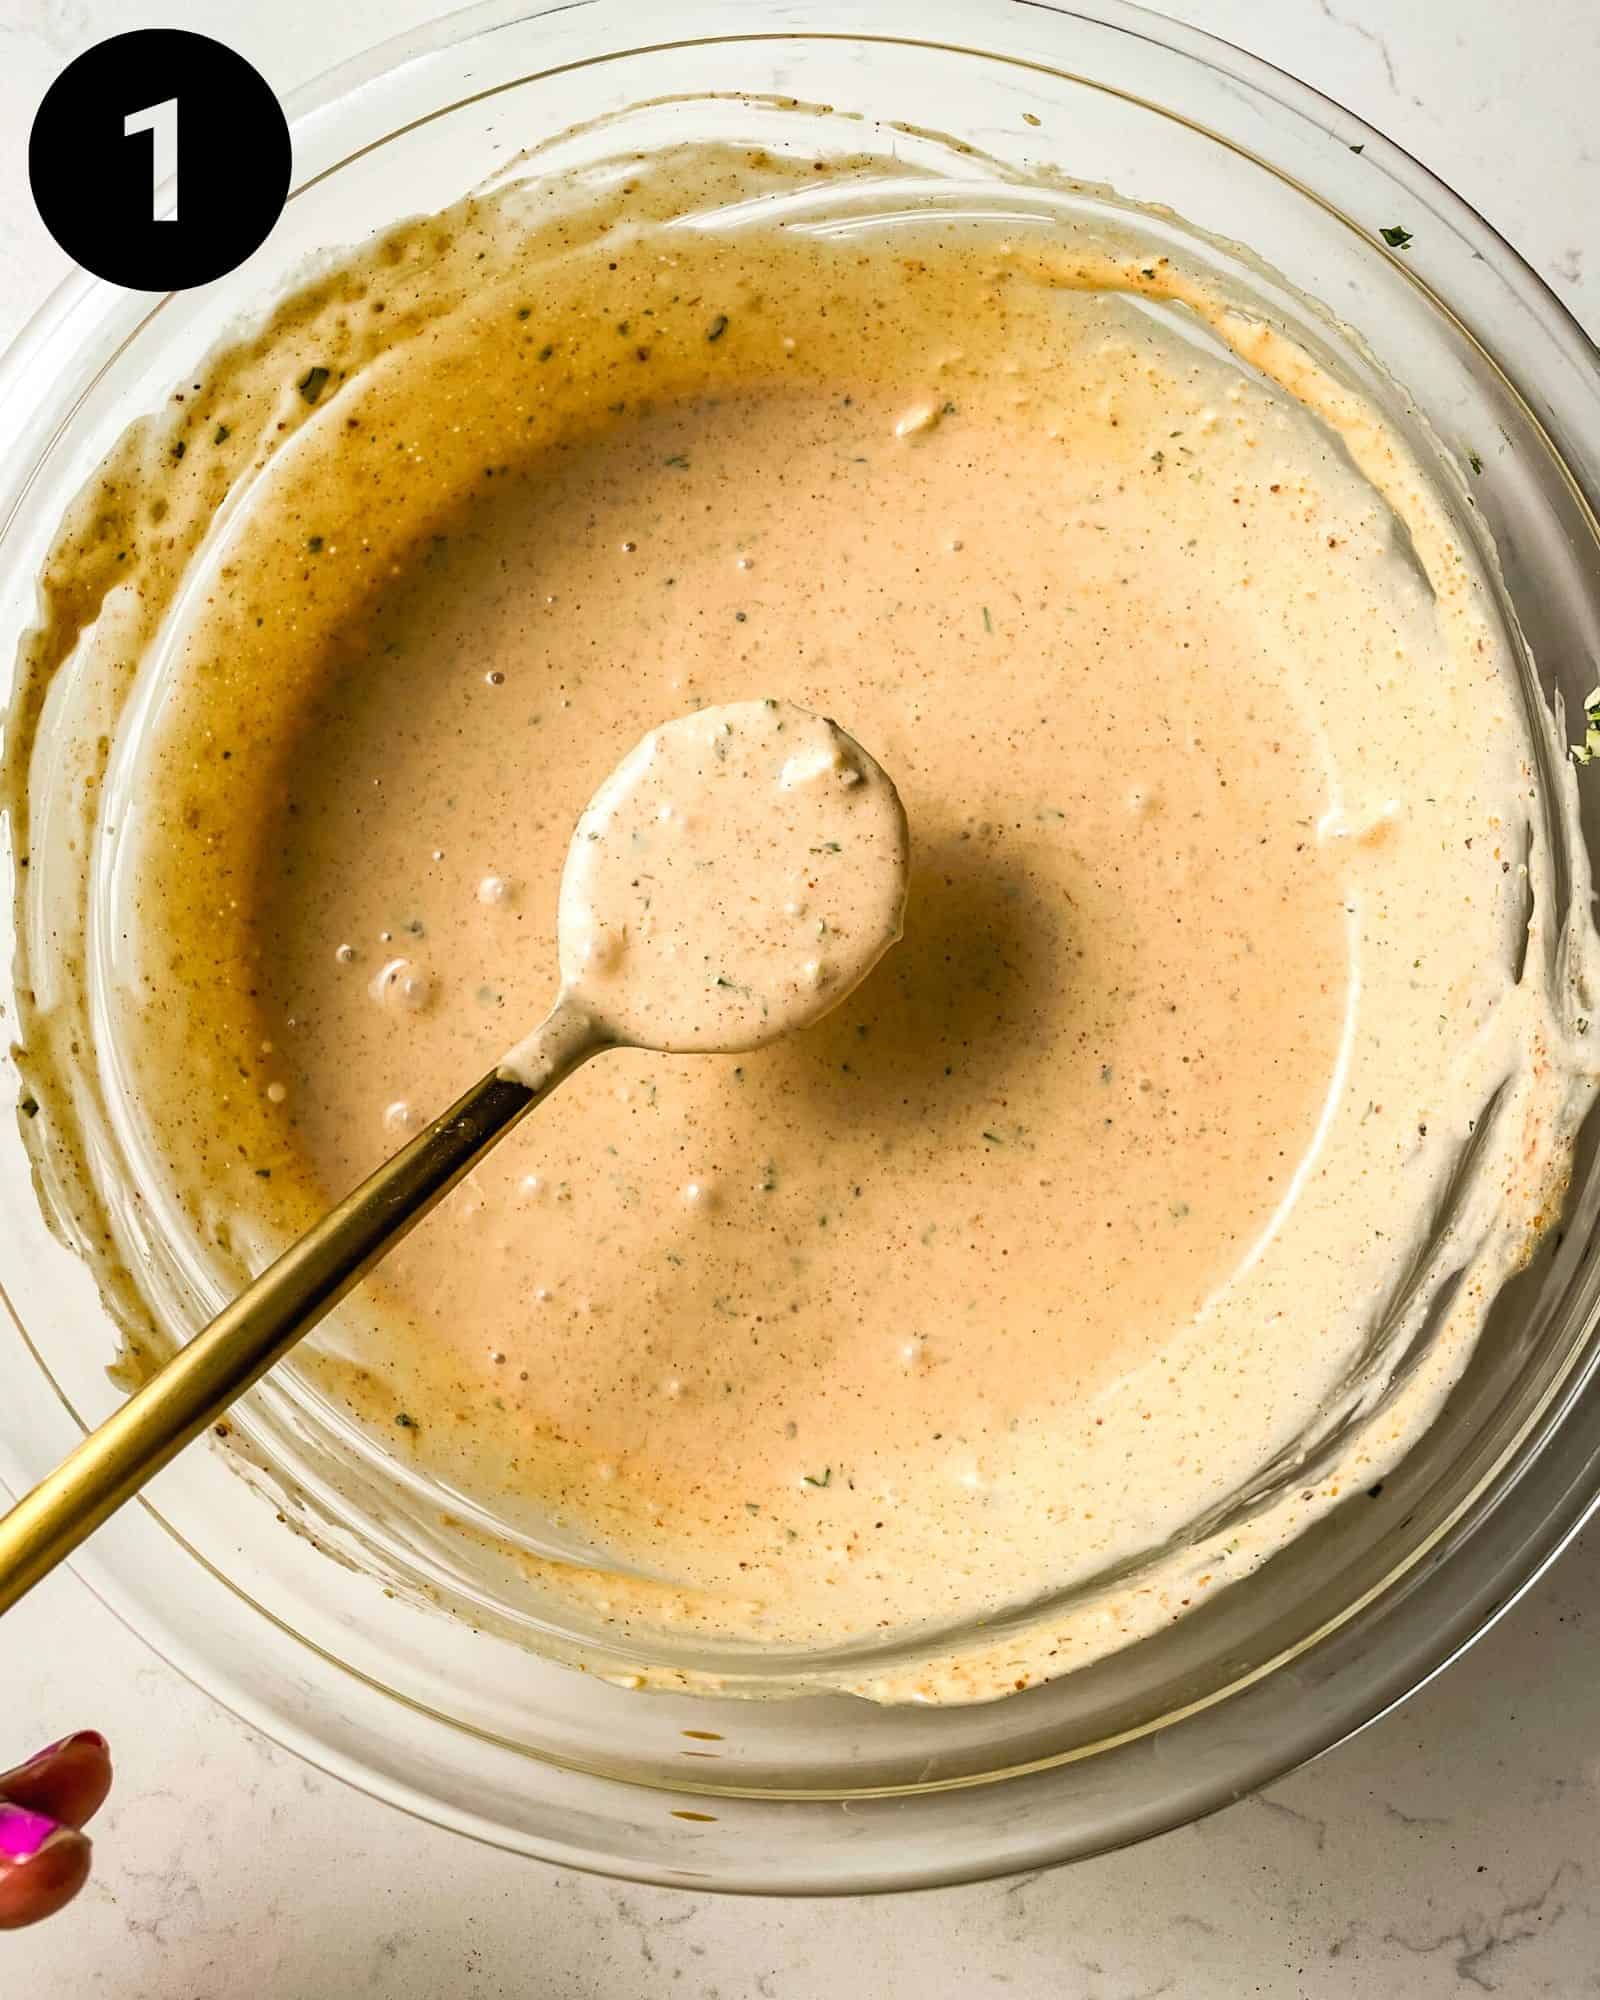 remoulade sauce mixed together in a large bowl.